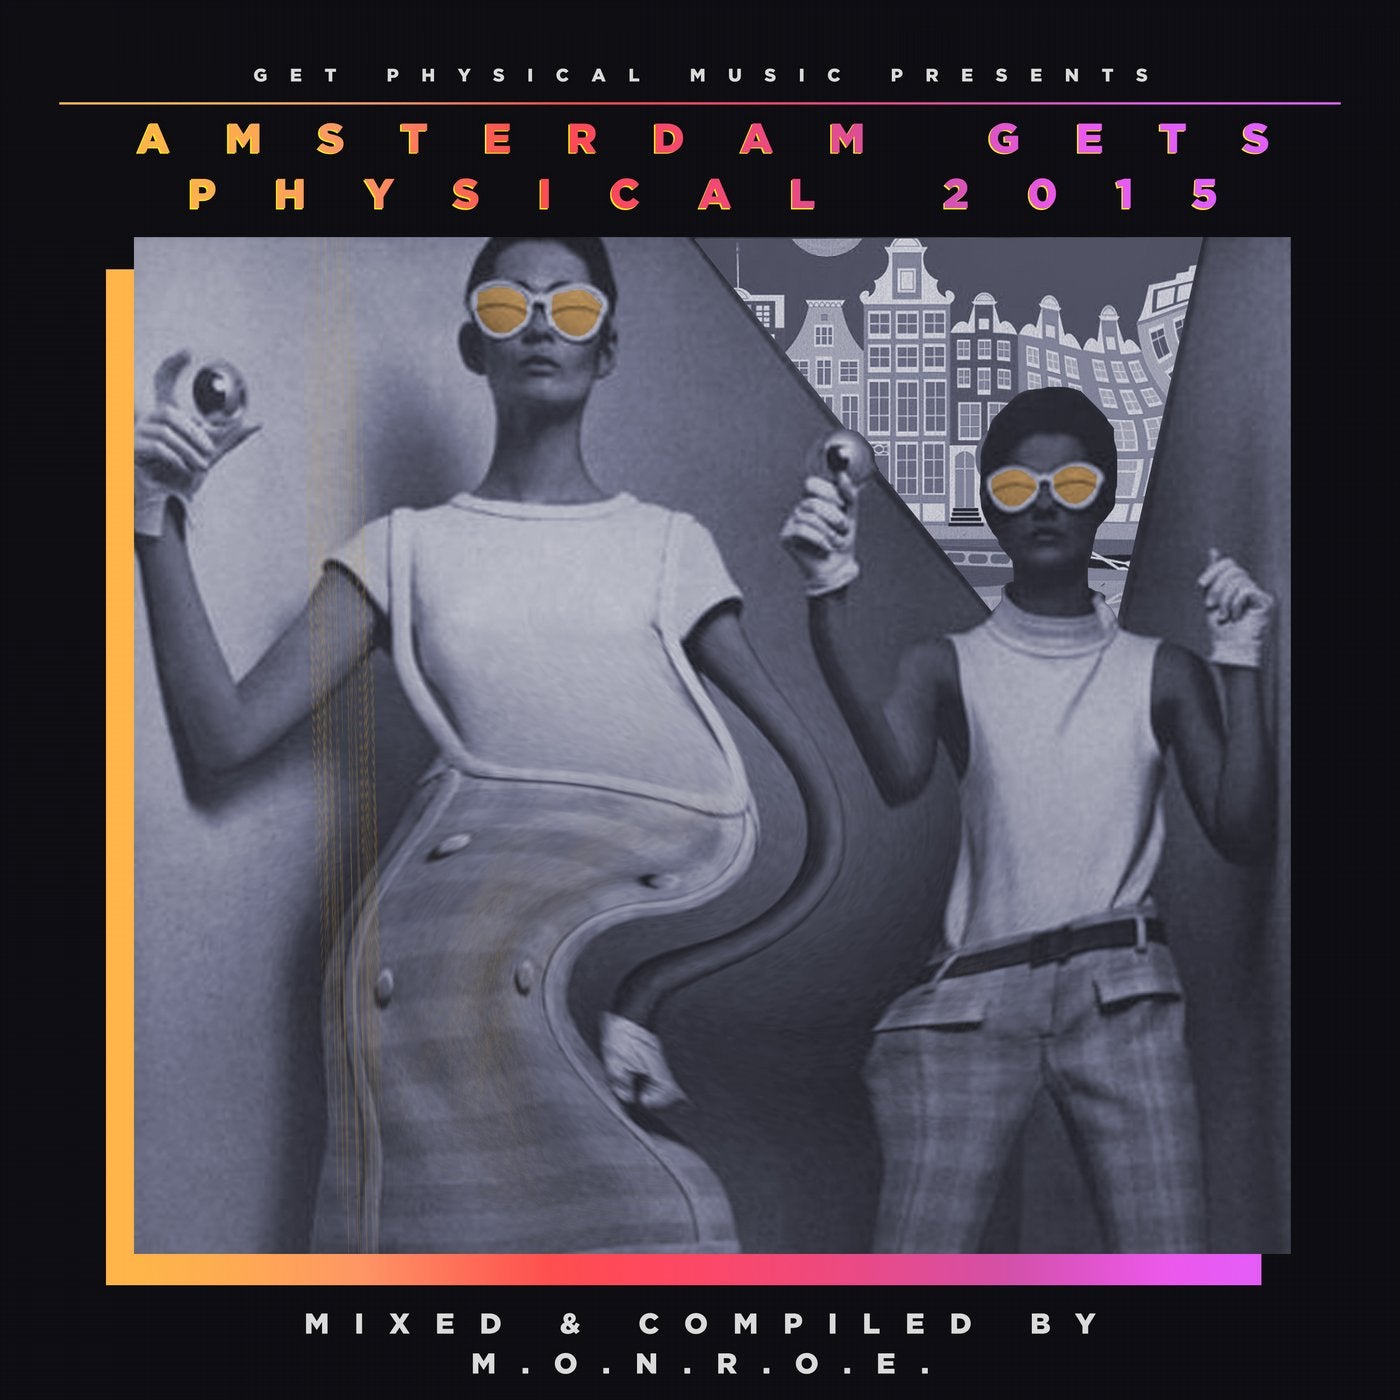 Get Physical Music Presents: Amsterdam Gets Physical 2015 By M.O.N.R.O.E.